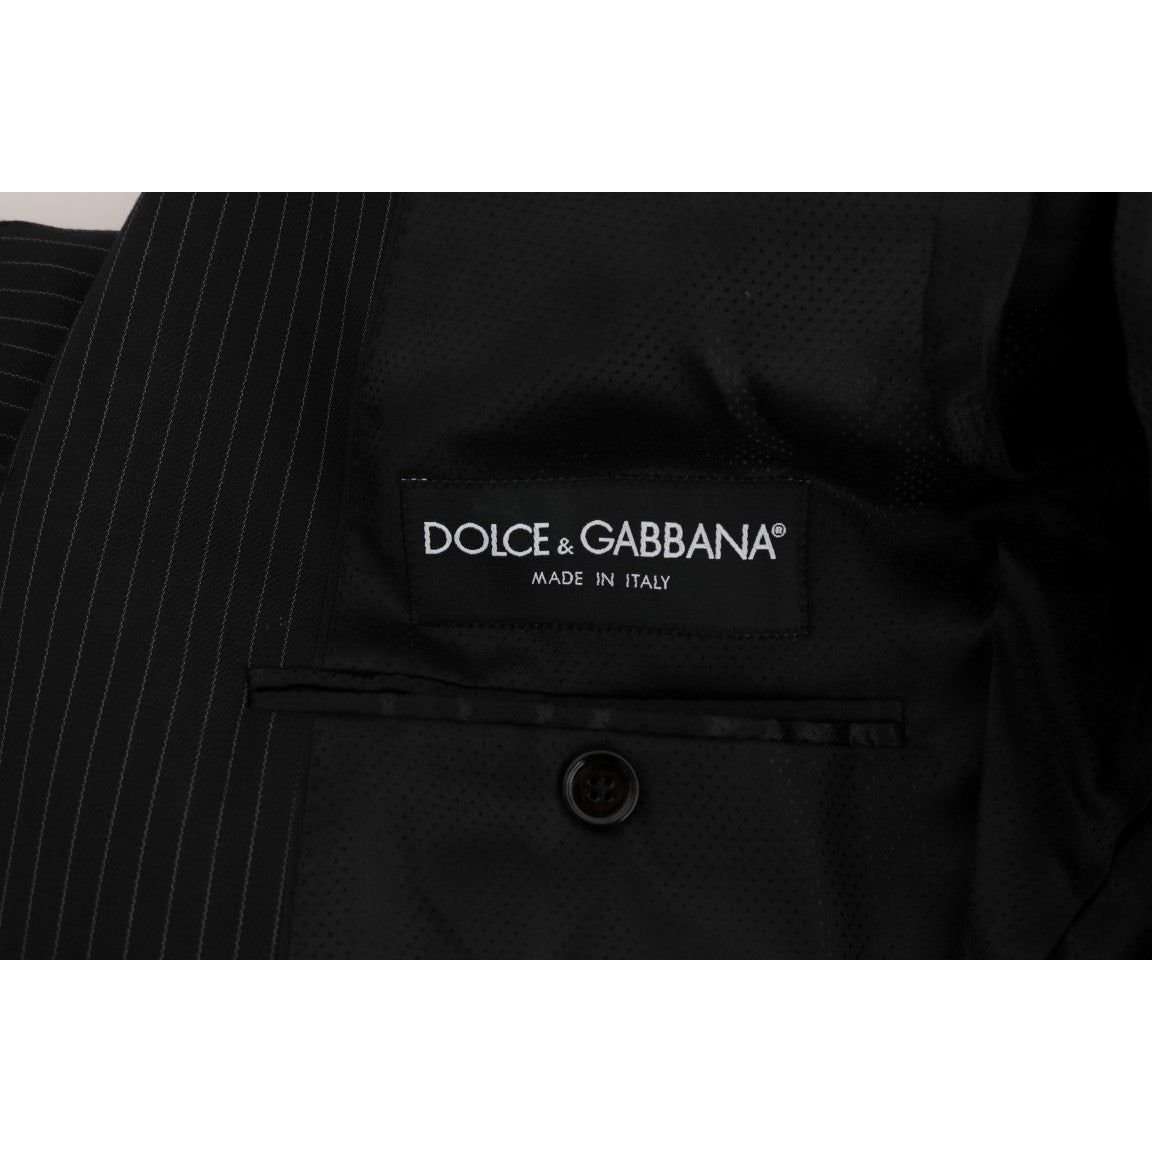 Dolce & Gabbana Elegant Gray Striped Wool Silk Men's 3-Piece Suit gray-double-breasted-3-piece-suit Suit 460447-gray-double-breasted-3-piece-suit-9.jpg